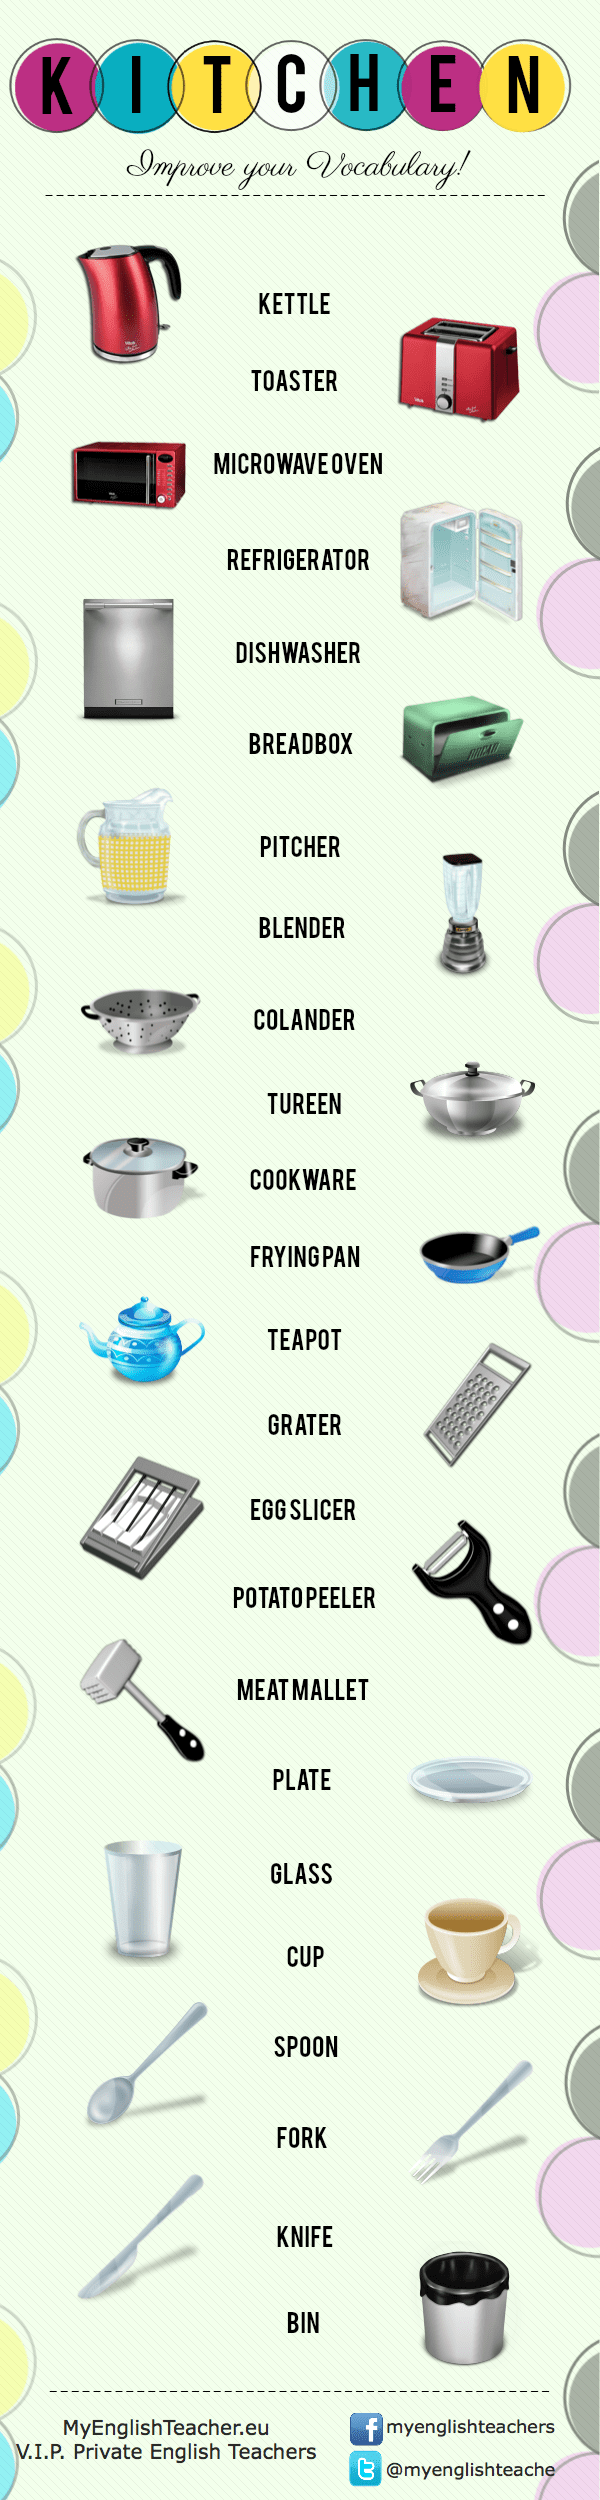 24 Tools in the Kitchen - Improve Your Vocabulary